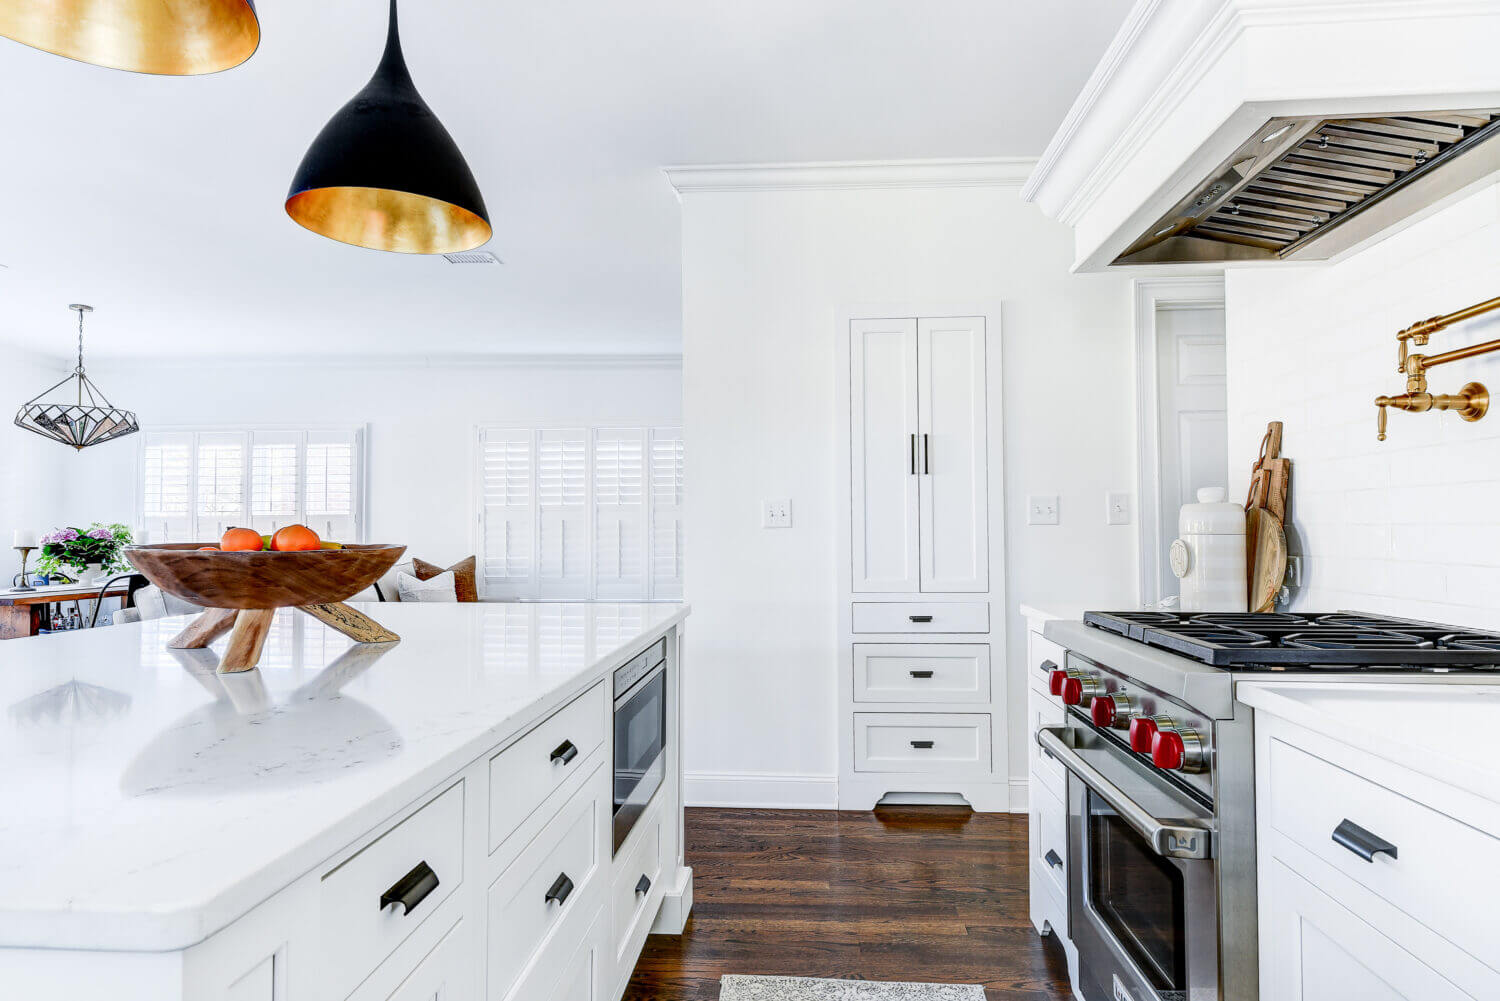 A linen cabinet is recessed into the wall for additional hallway storage that coordinates with the bright white kitchen cabinetry.